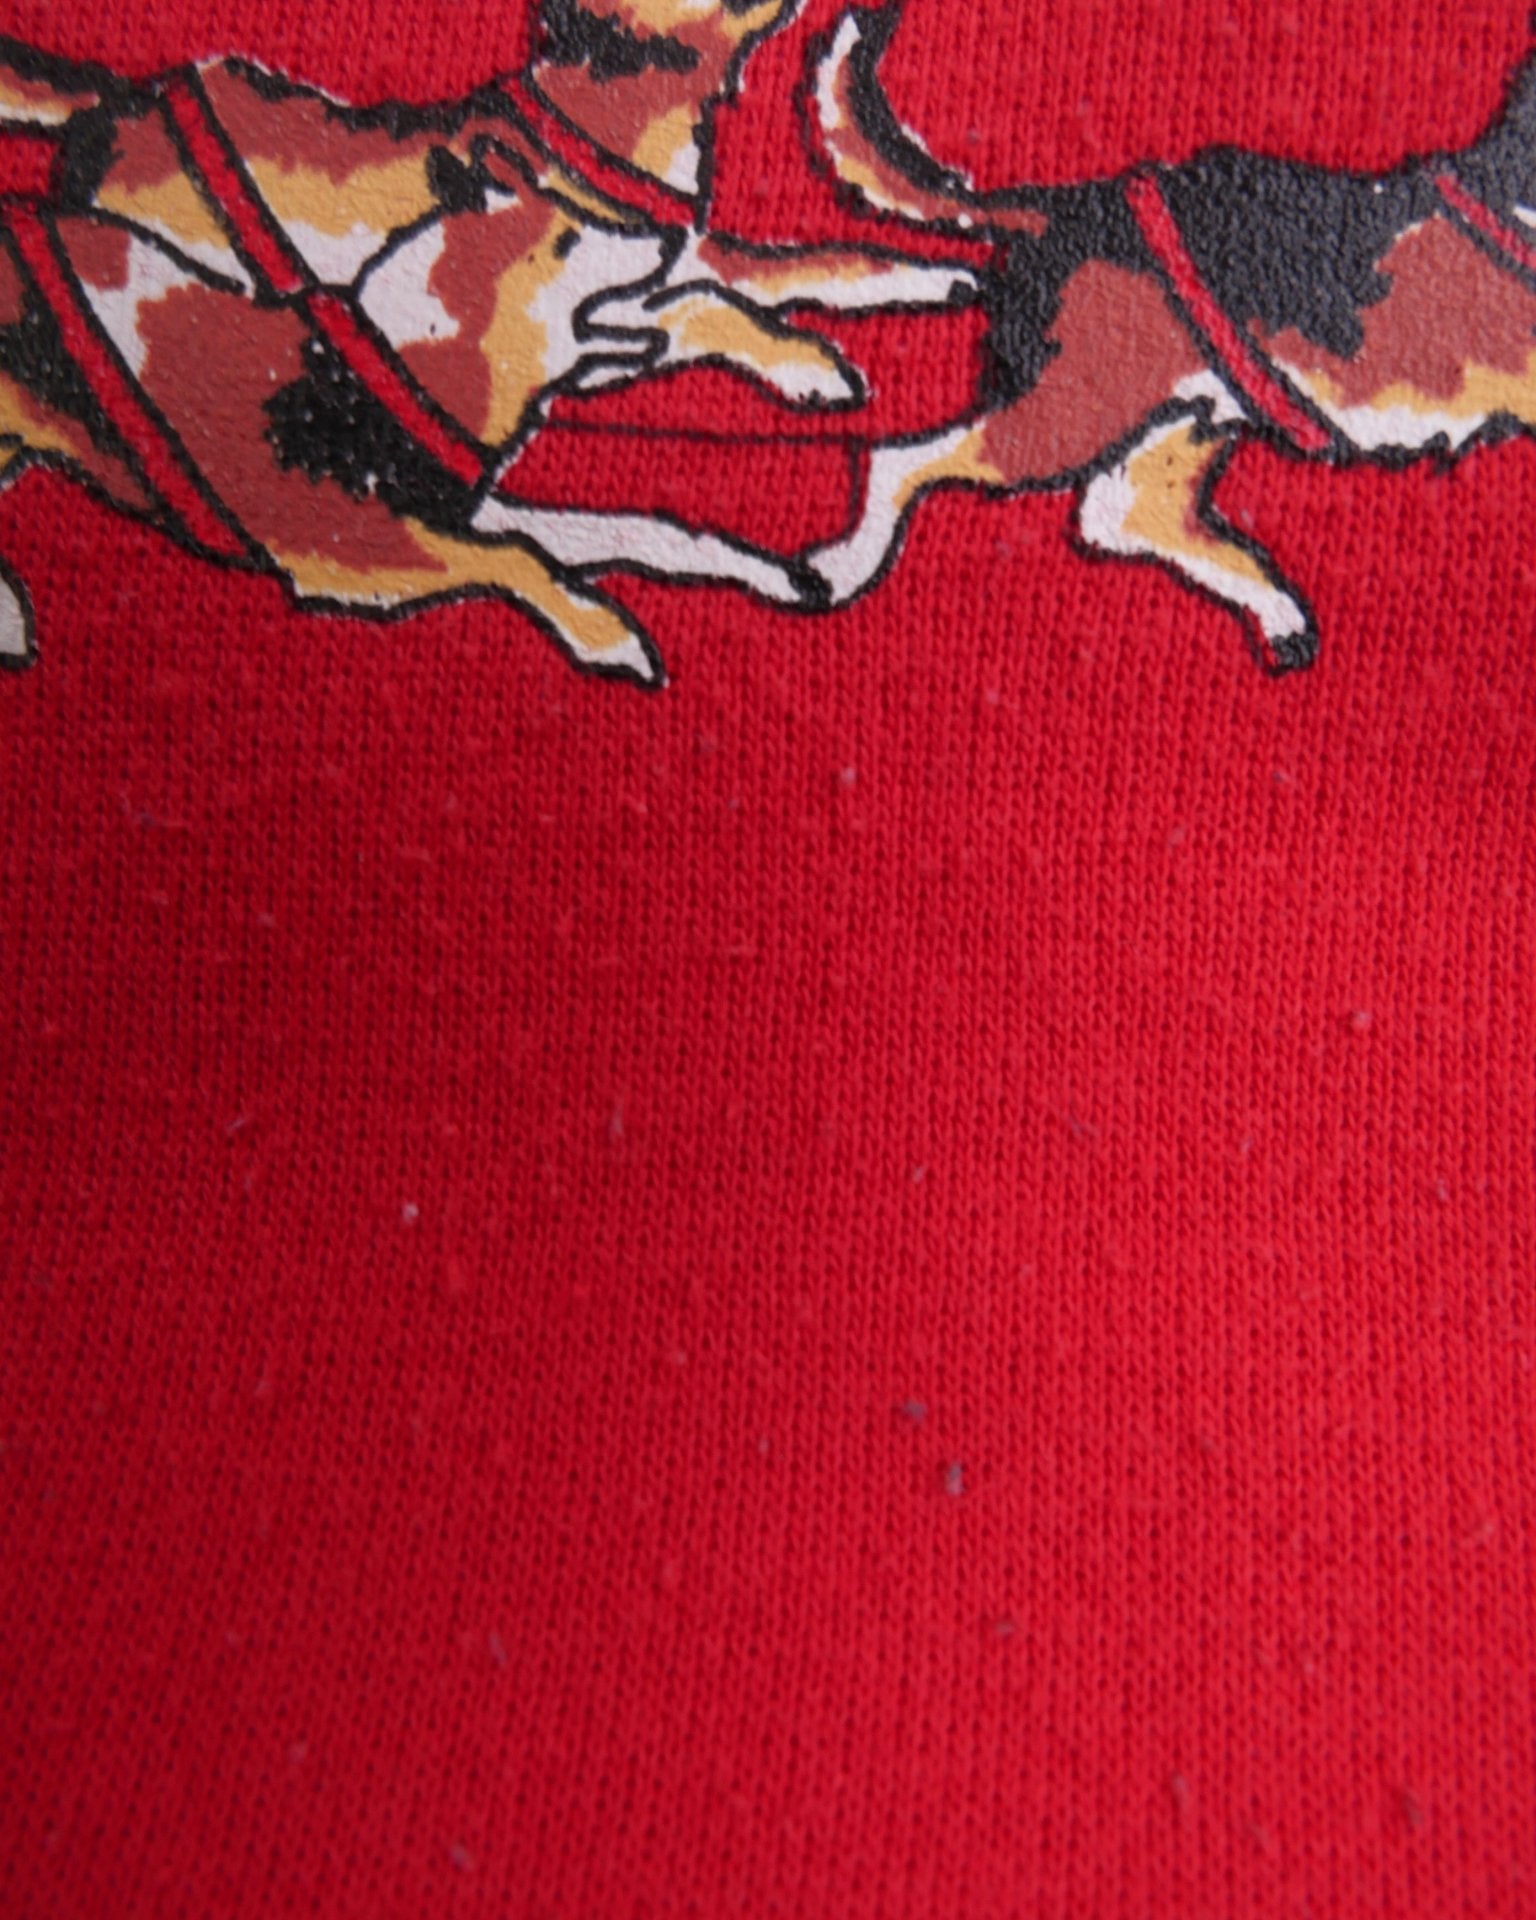 printed Countrywide red Sweater - Peeces